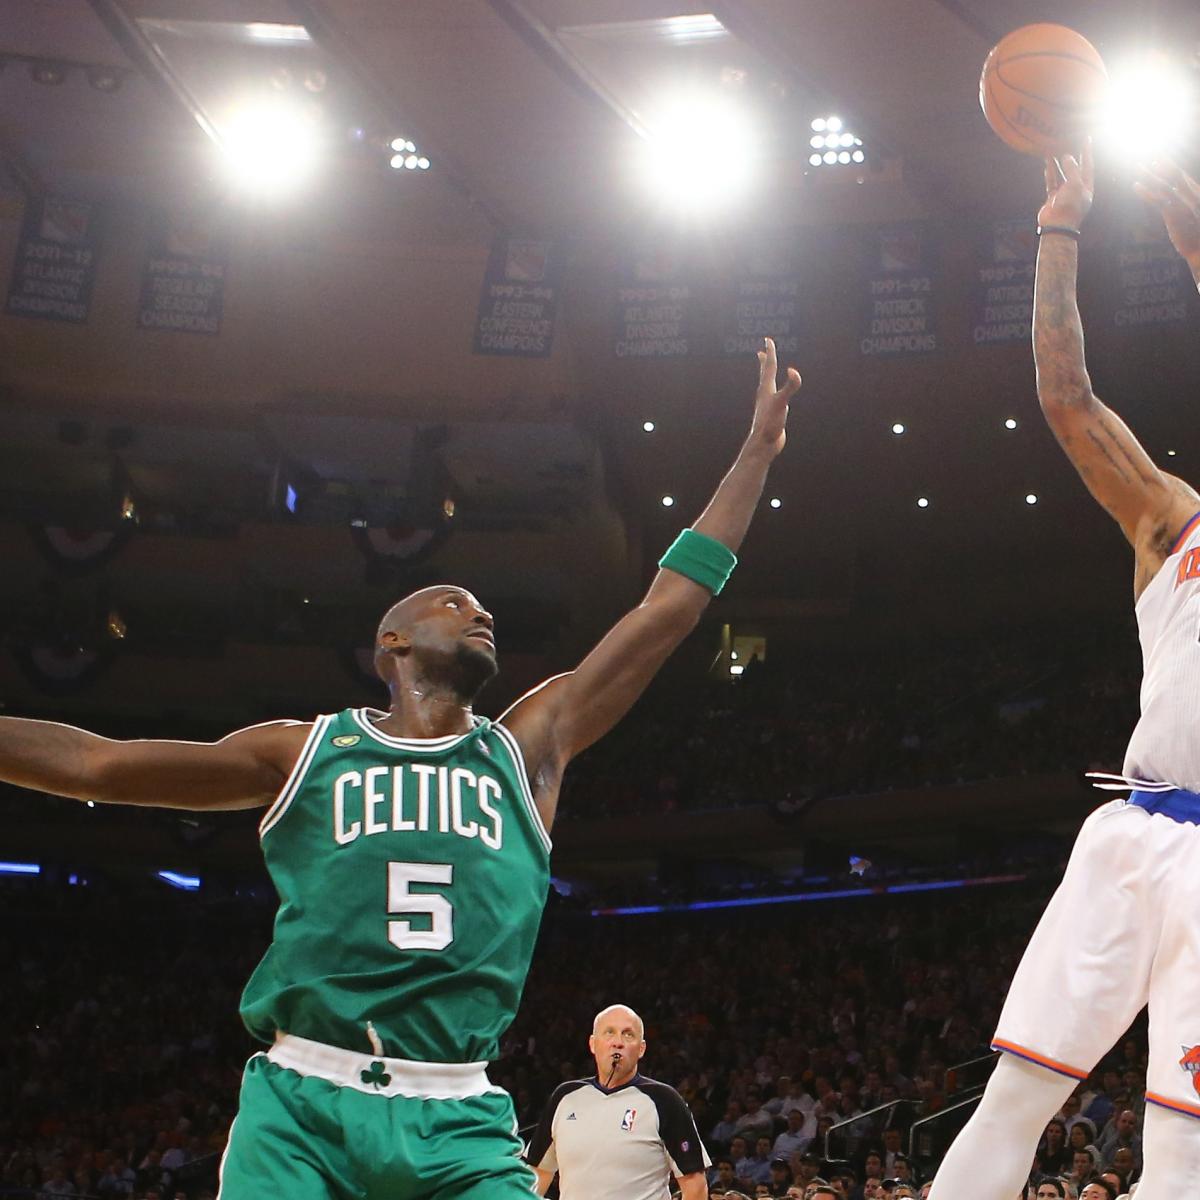 Boston Celtics vs. NY Knicks: Game 5 Preview, Schedule and Predictions